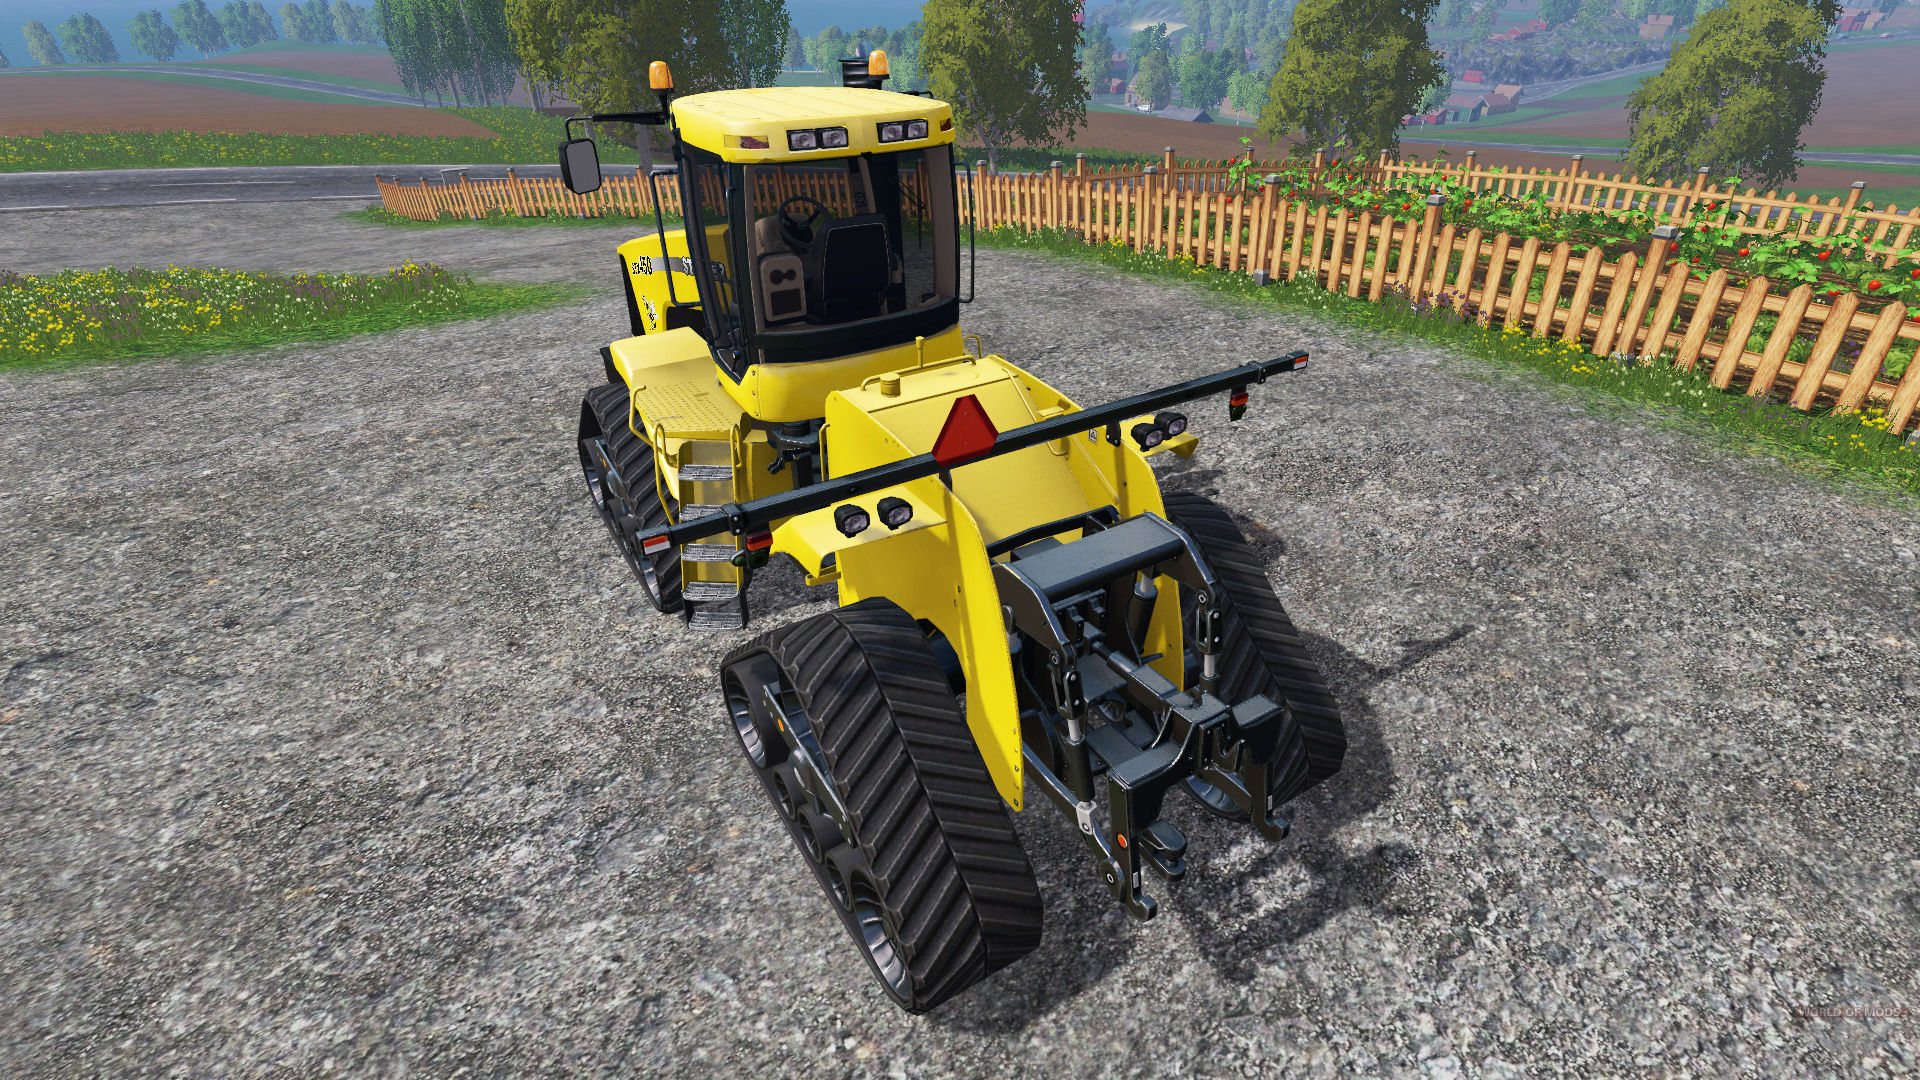 Tracked agricultural tractor Case IH STX 450 for Farming Simulator 15.